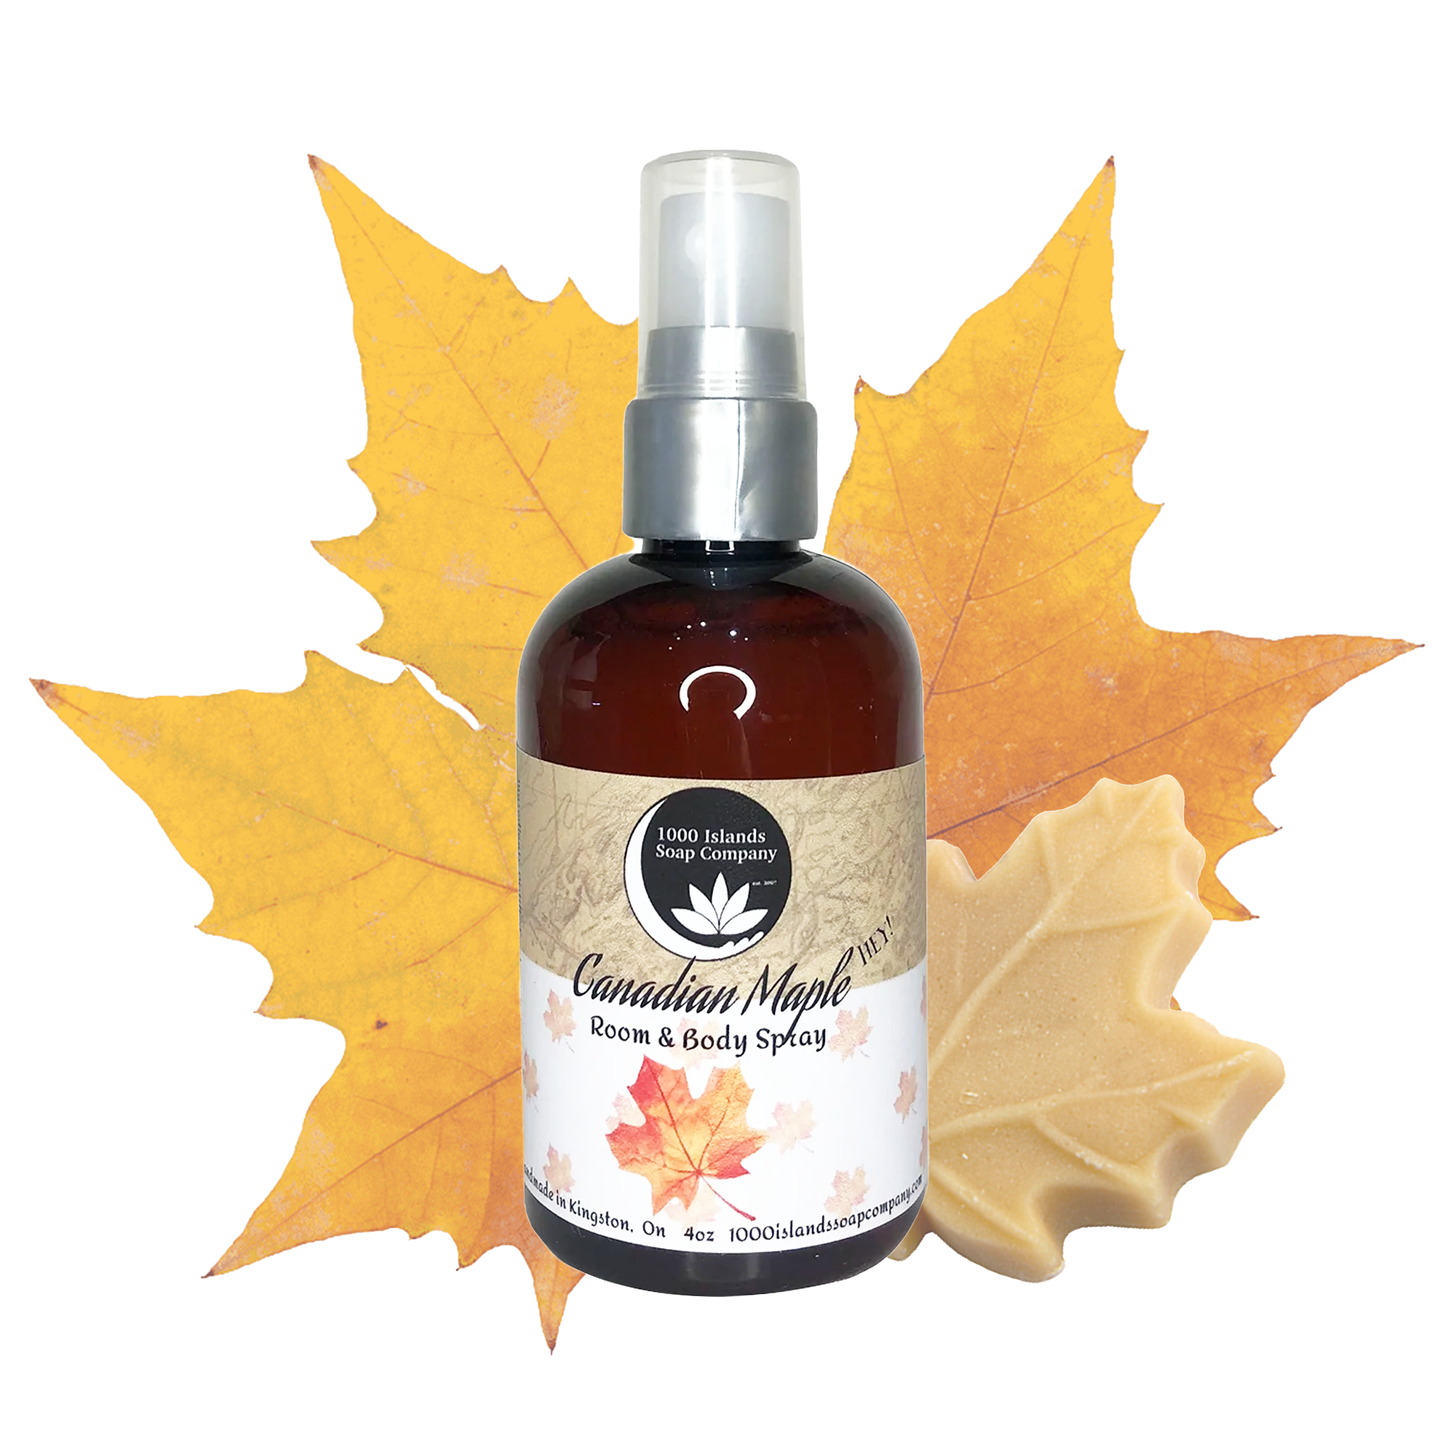 Canadian Maple Room and Body Spray